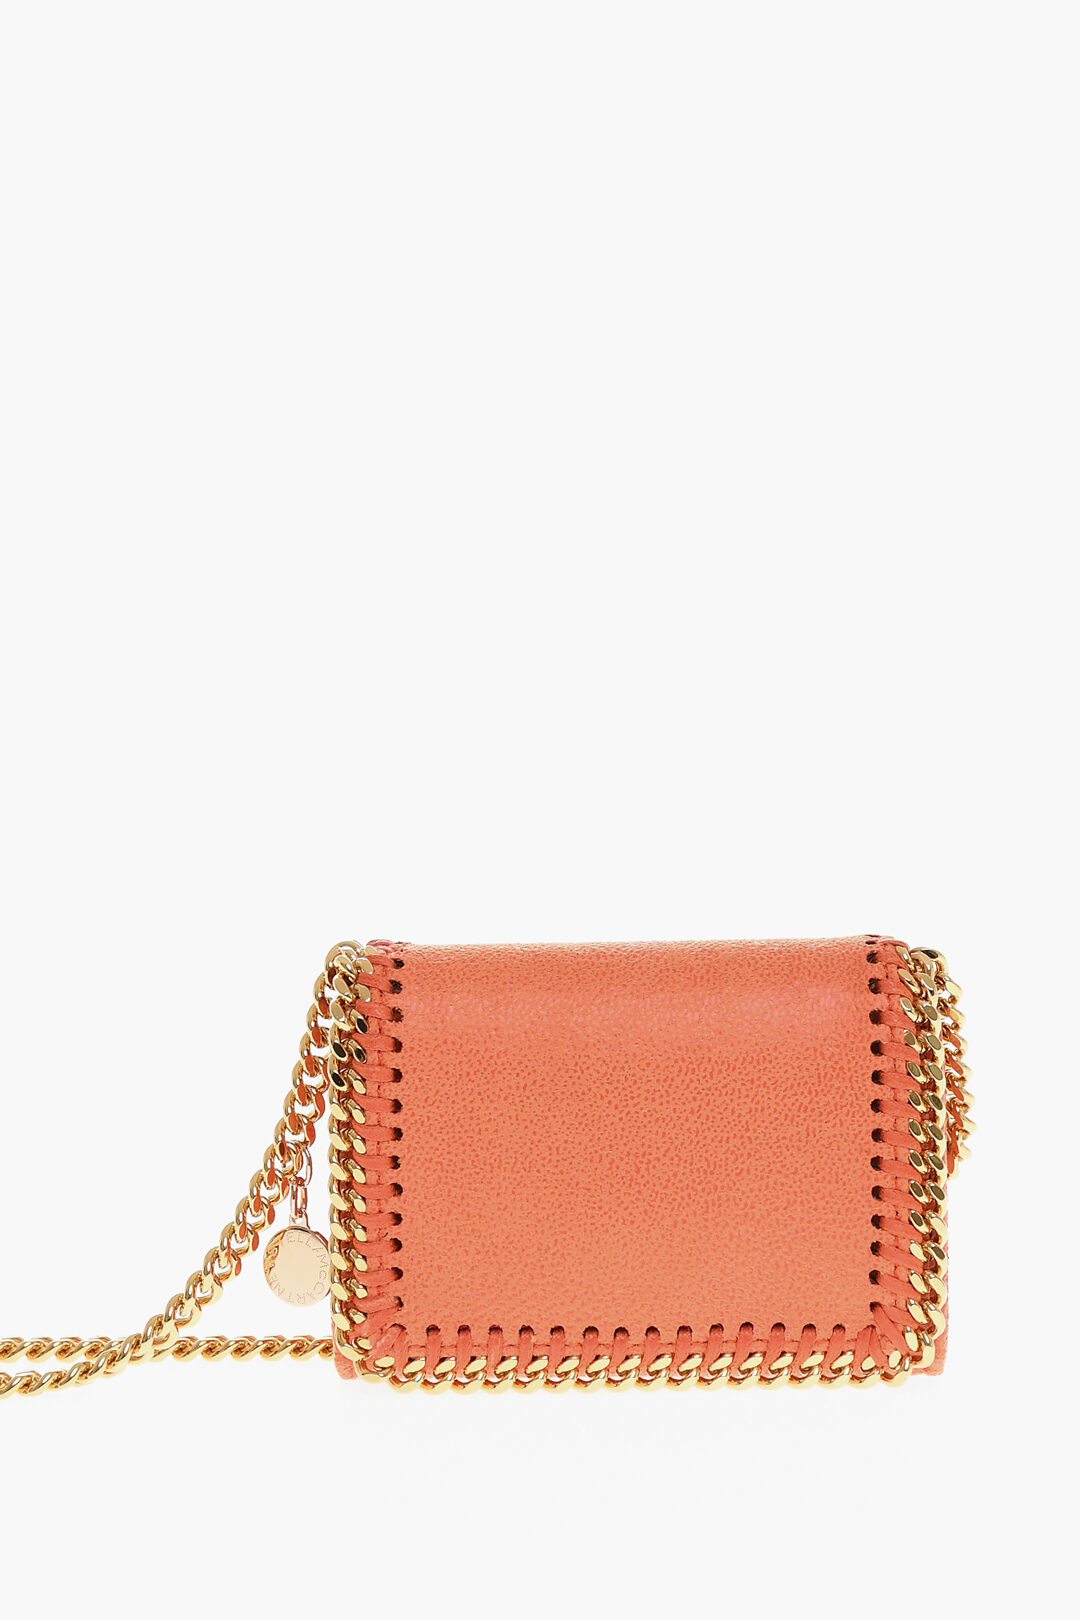 Faux Leather FALABELLA Card Holder with Golden Chain Shoulder Strap